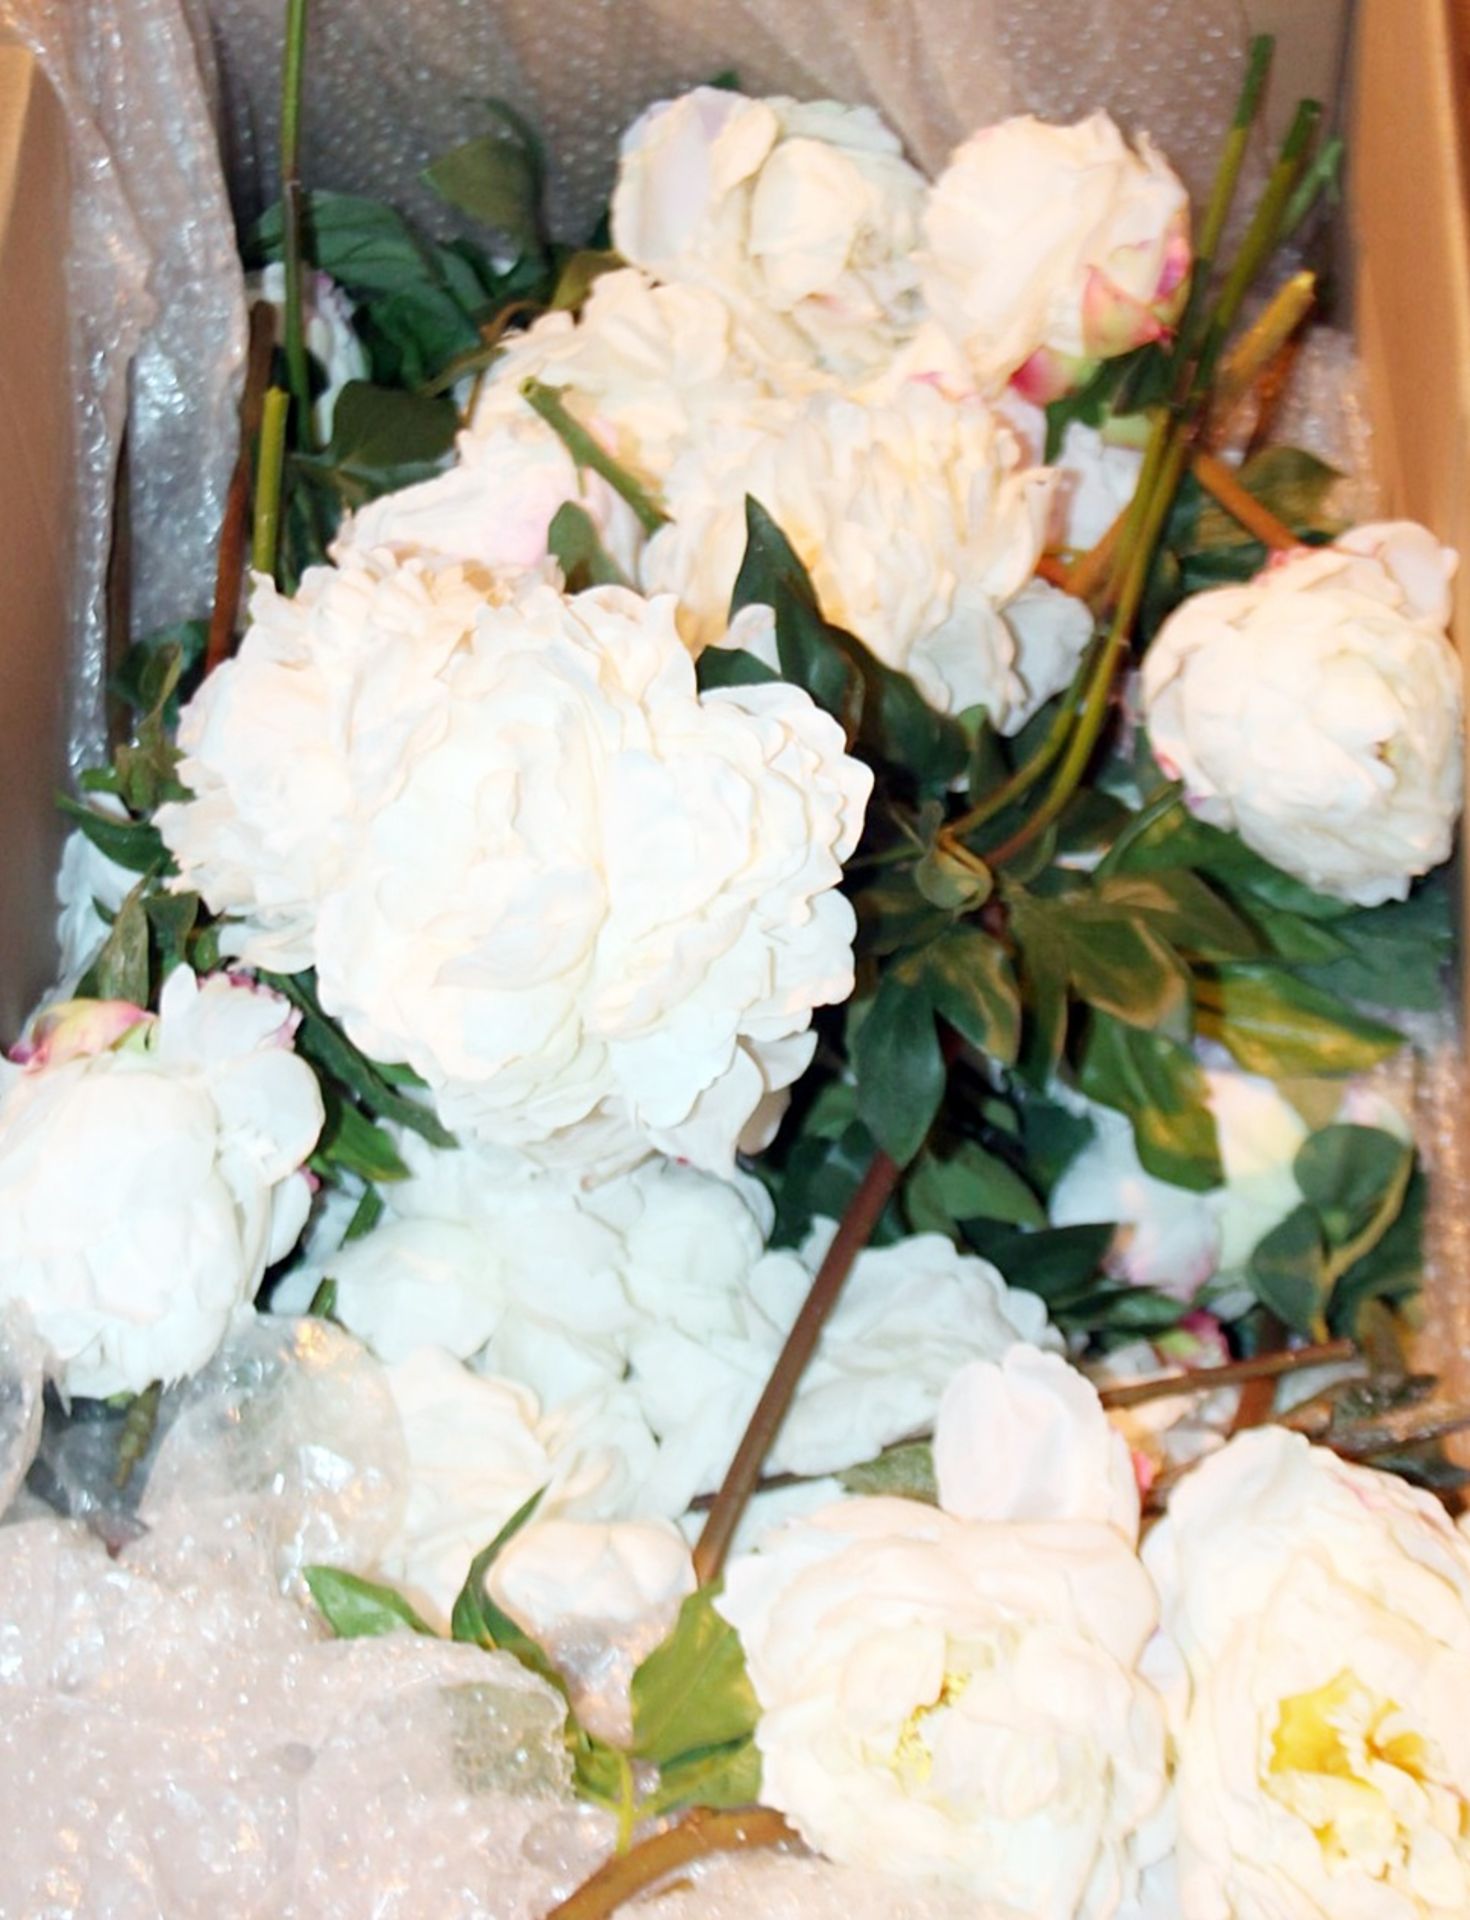 Large Quantity Of Premium Artificial Silk Flowers In Whites And Pinks - Approximately 100 pcs - Image 3 of 6